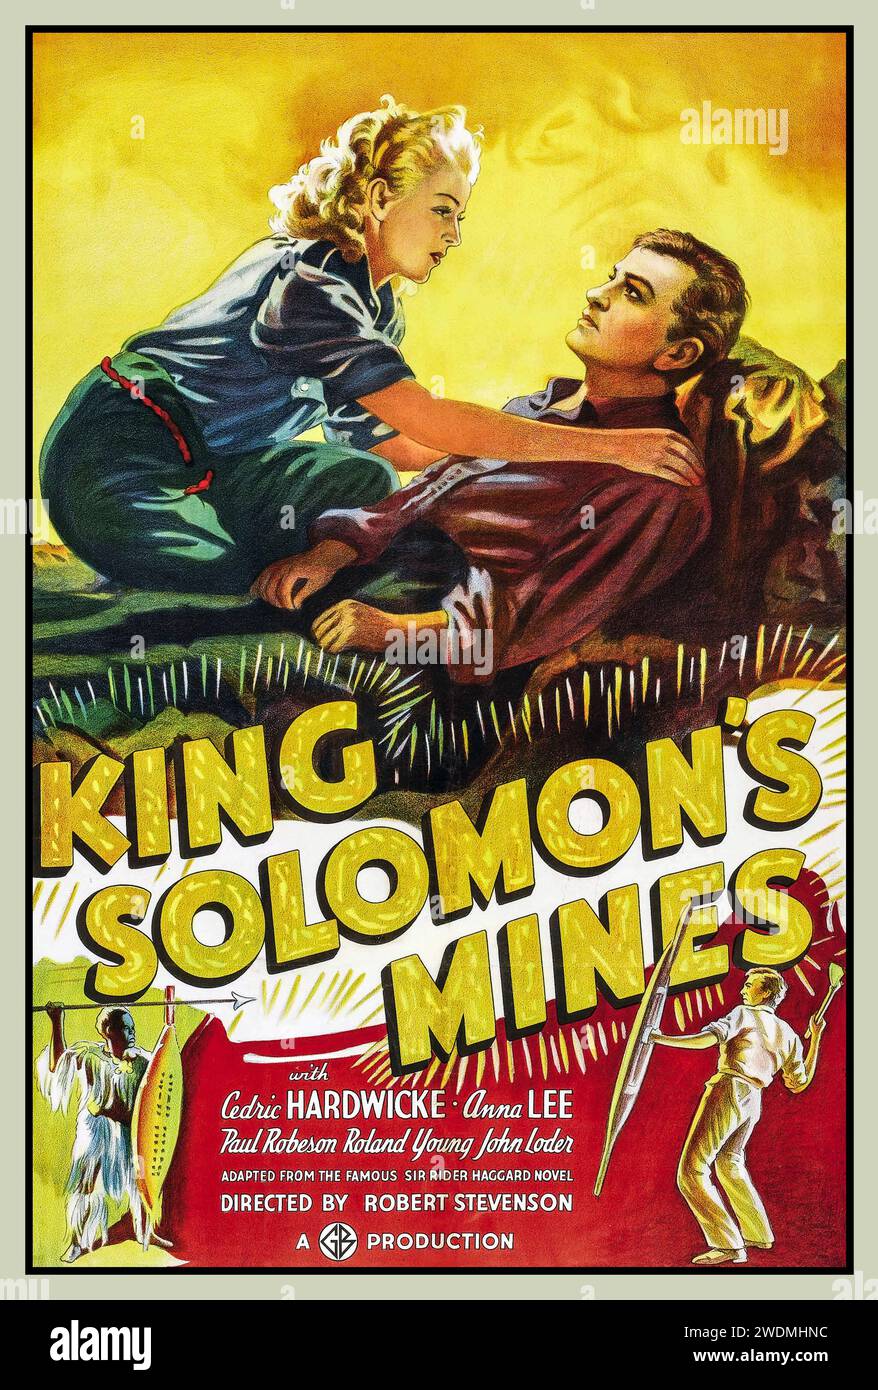 Vintage Movie Poster 'KING SOLOMONS MINES' King Solomon's Mines is a 1937 British adventure film directed by Robert Stevenson and starring Paul Robeson, Cedric Hardwicke, Anna Lee, John Loder and Roland Young. A film adaptation of the 1885 novel of the same name by Henry Rider Haggard, the film was produced by the Gaumont British Picture Corporation at Lime Grove Studios in Shepherd's Bush. Sets were designed by art director Alfred Junge. Of all the novel's adaptations, this film is considered to be the most faithful to the book. Stock Photo